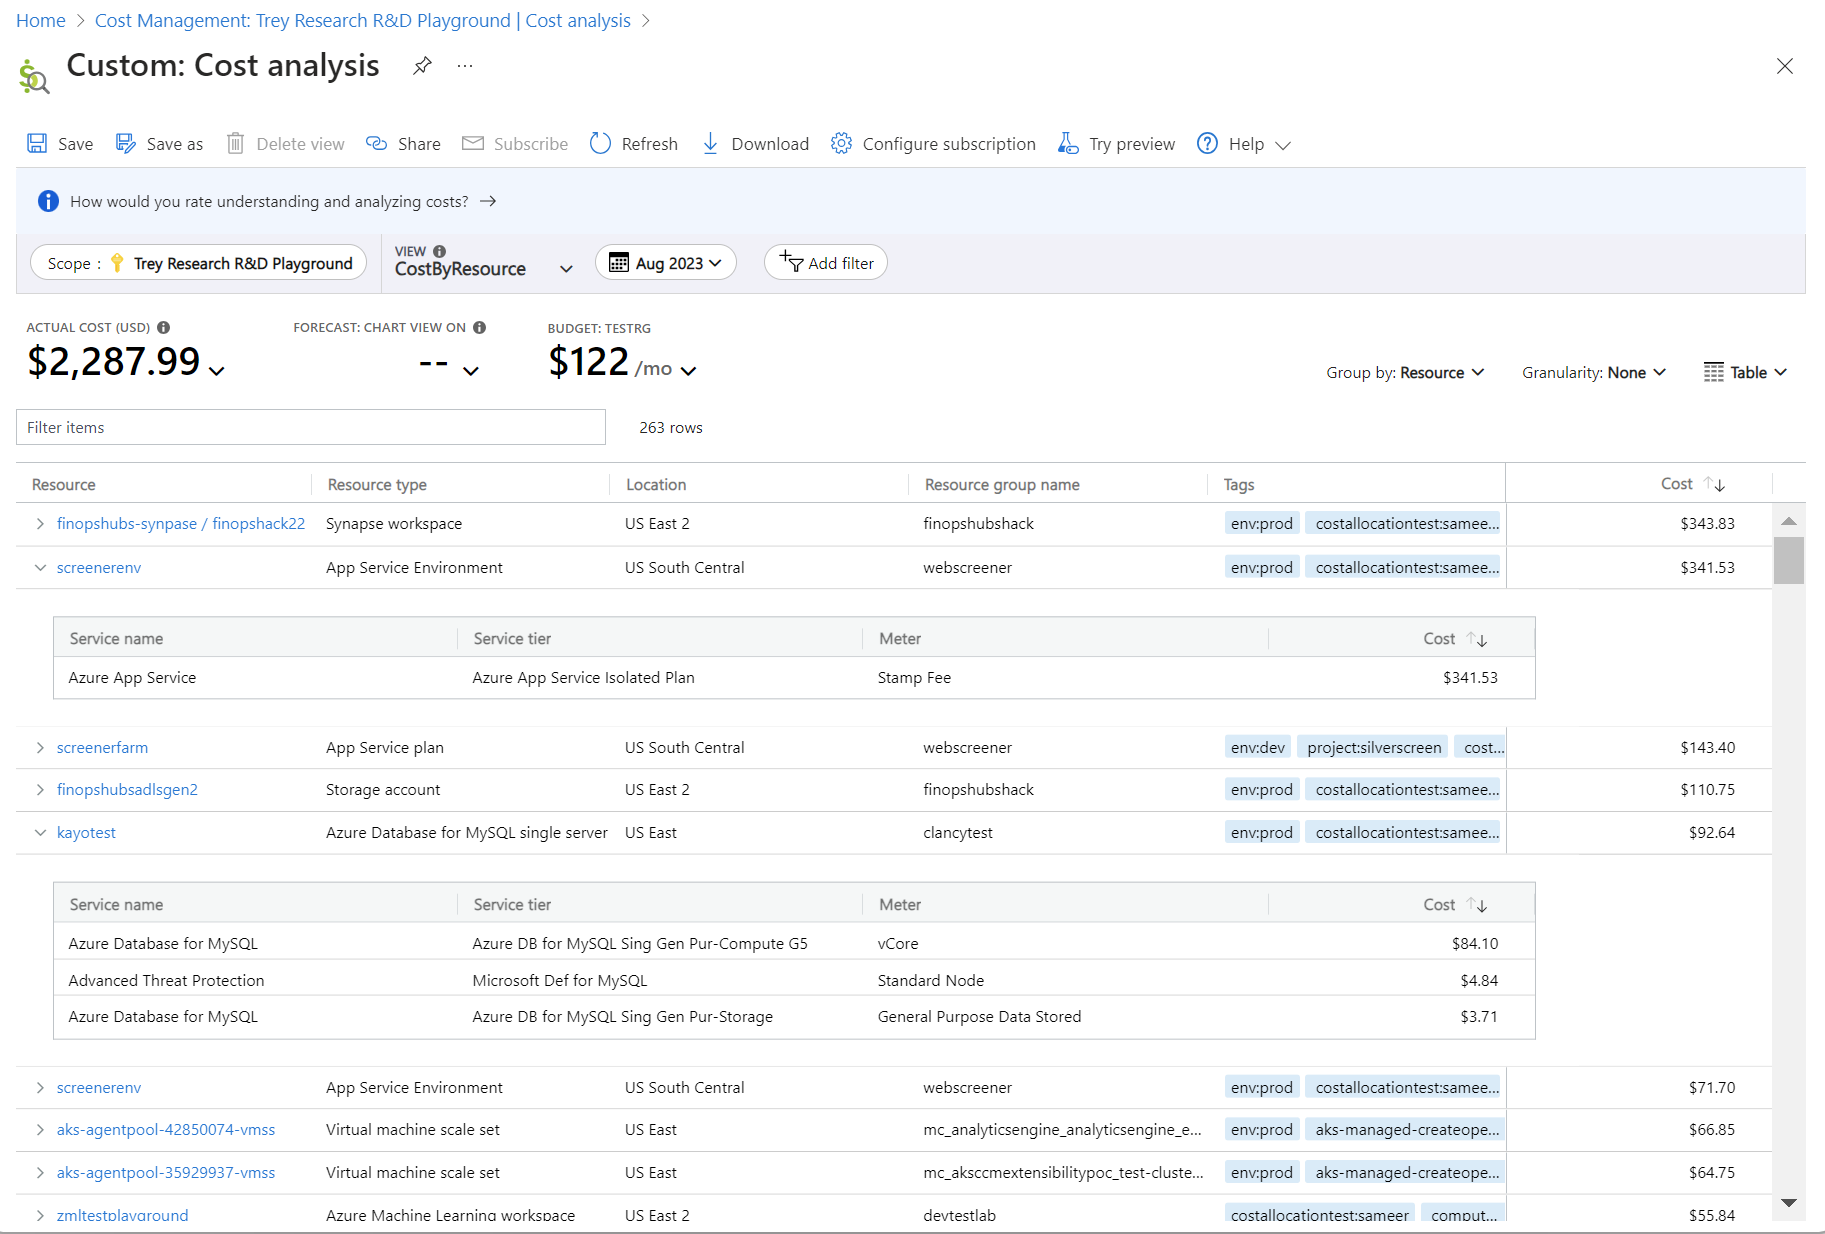 Screenshot showing an example of the Cost by resource view.